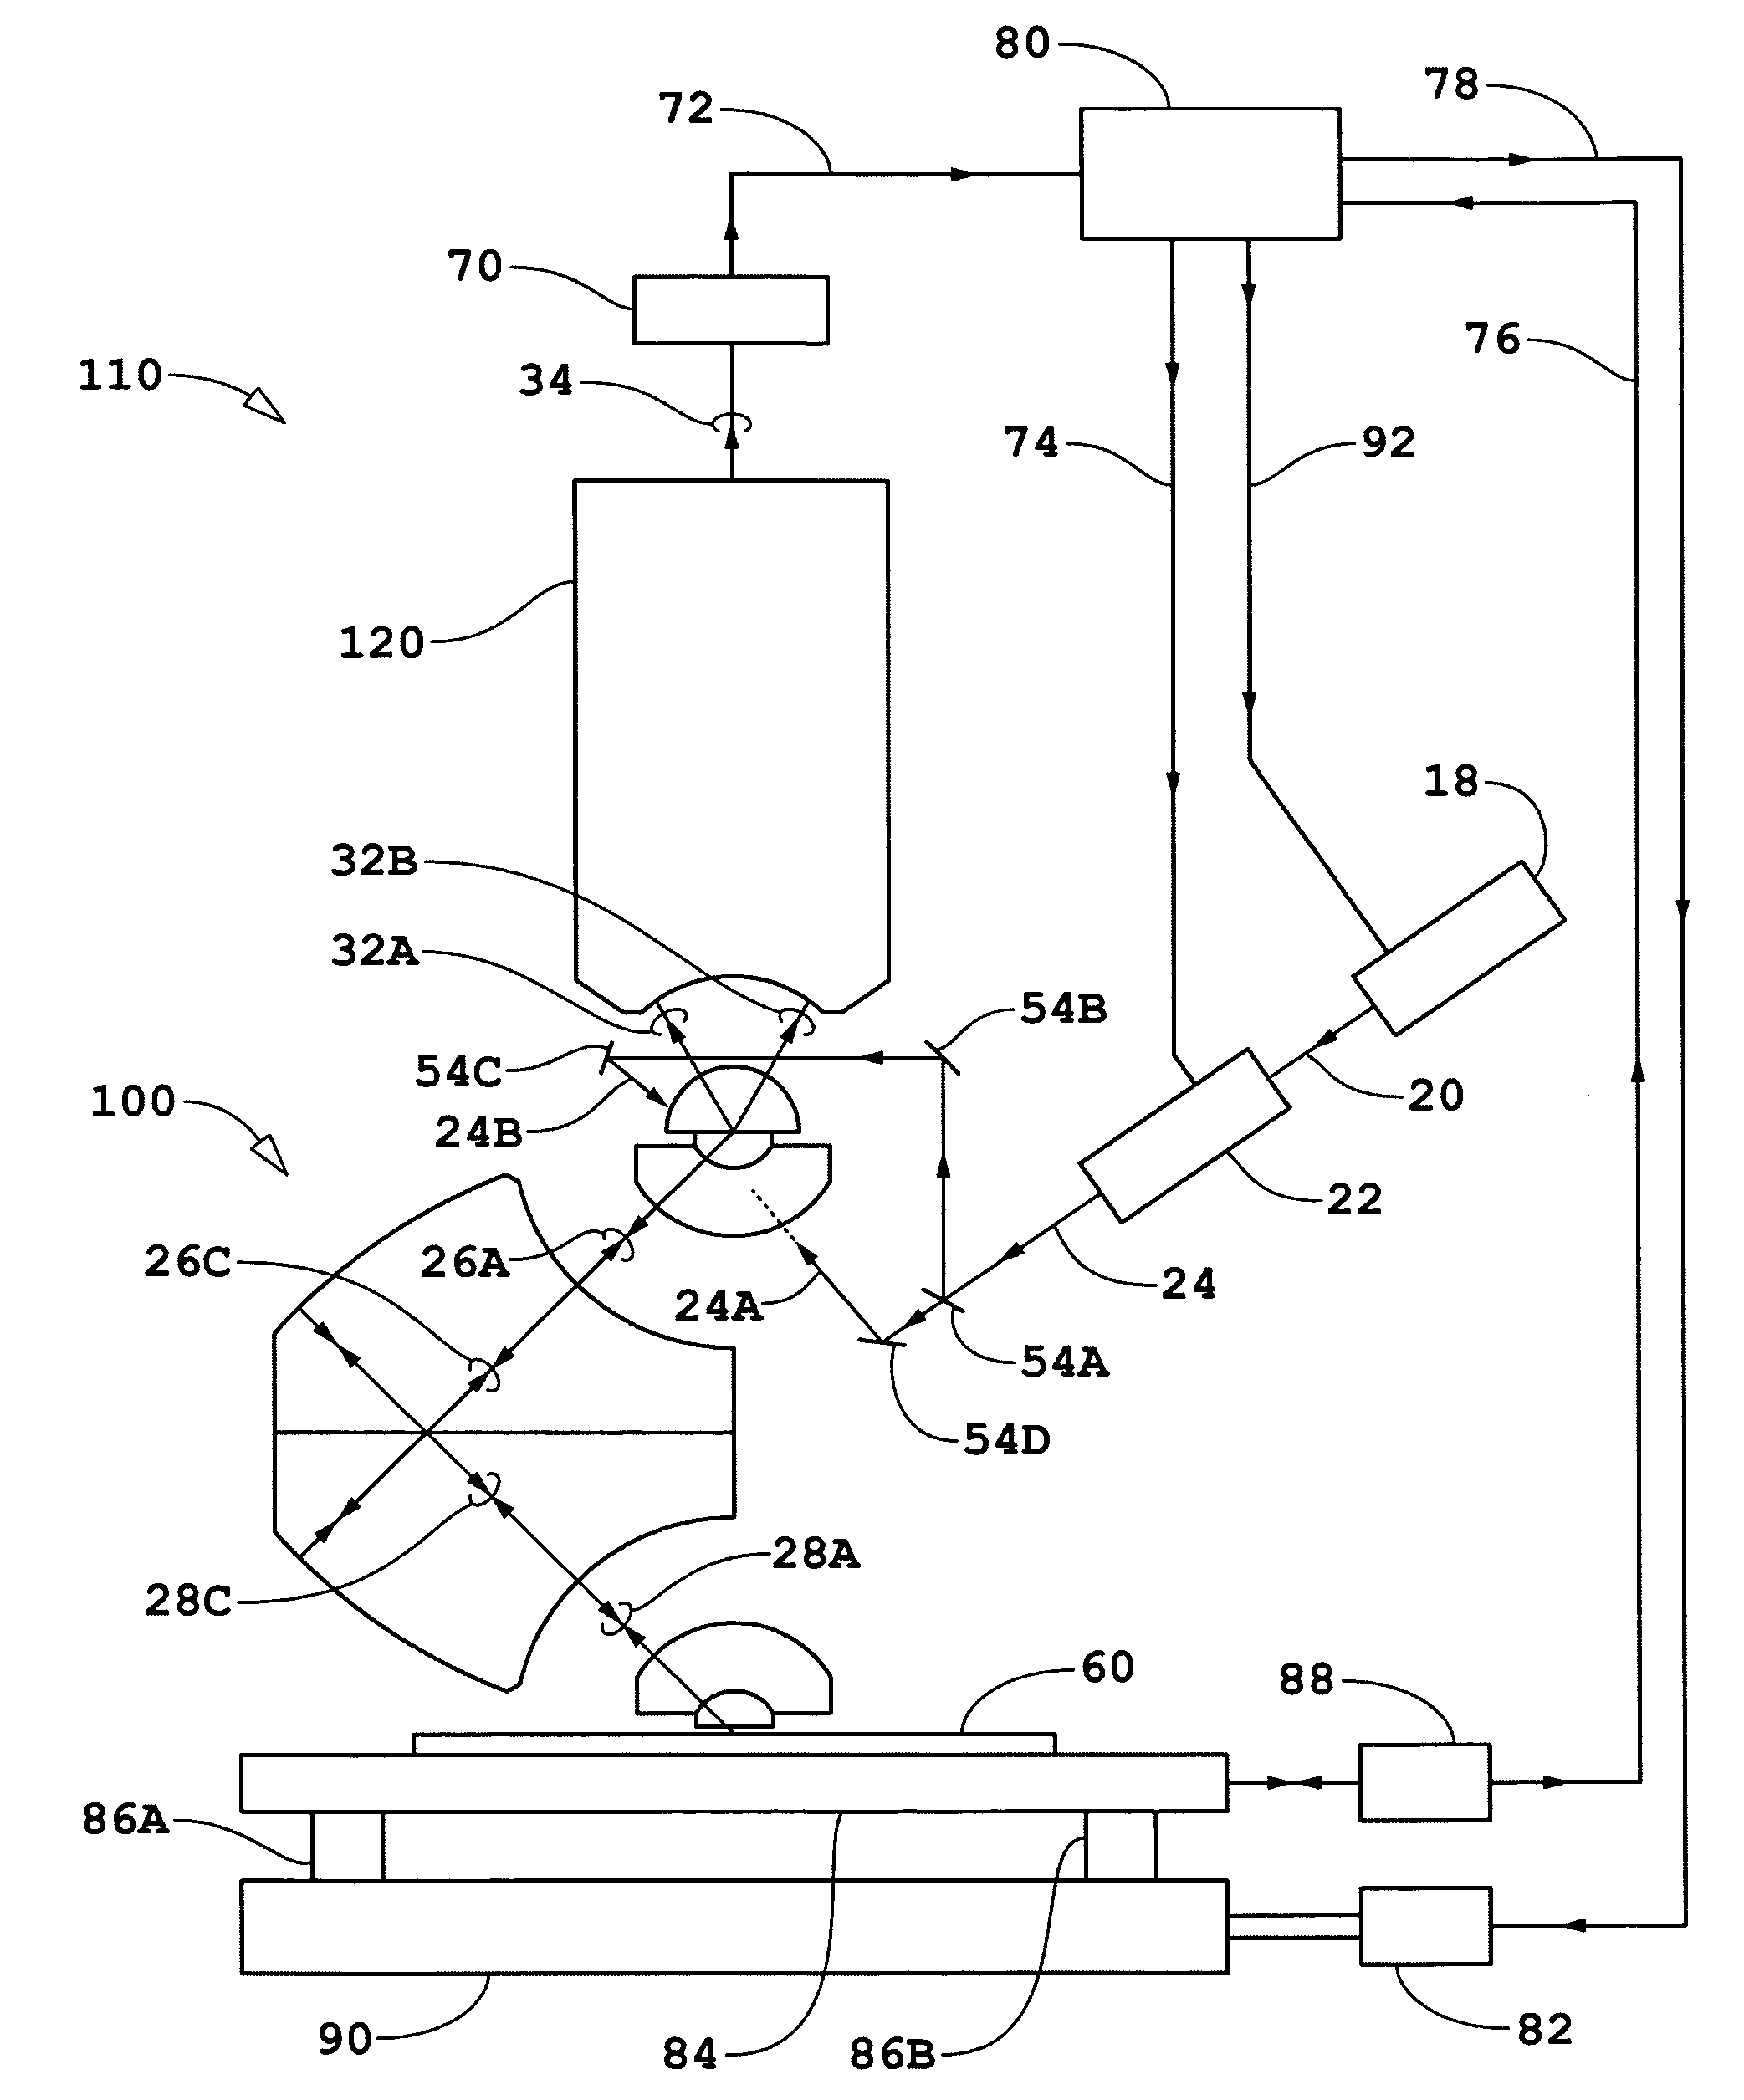 Apparatus and methods for overlay, alignment mark, and critical dimension metrologies based on optical interferometry